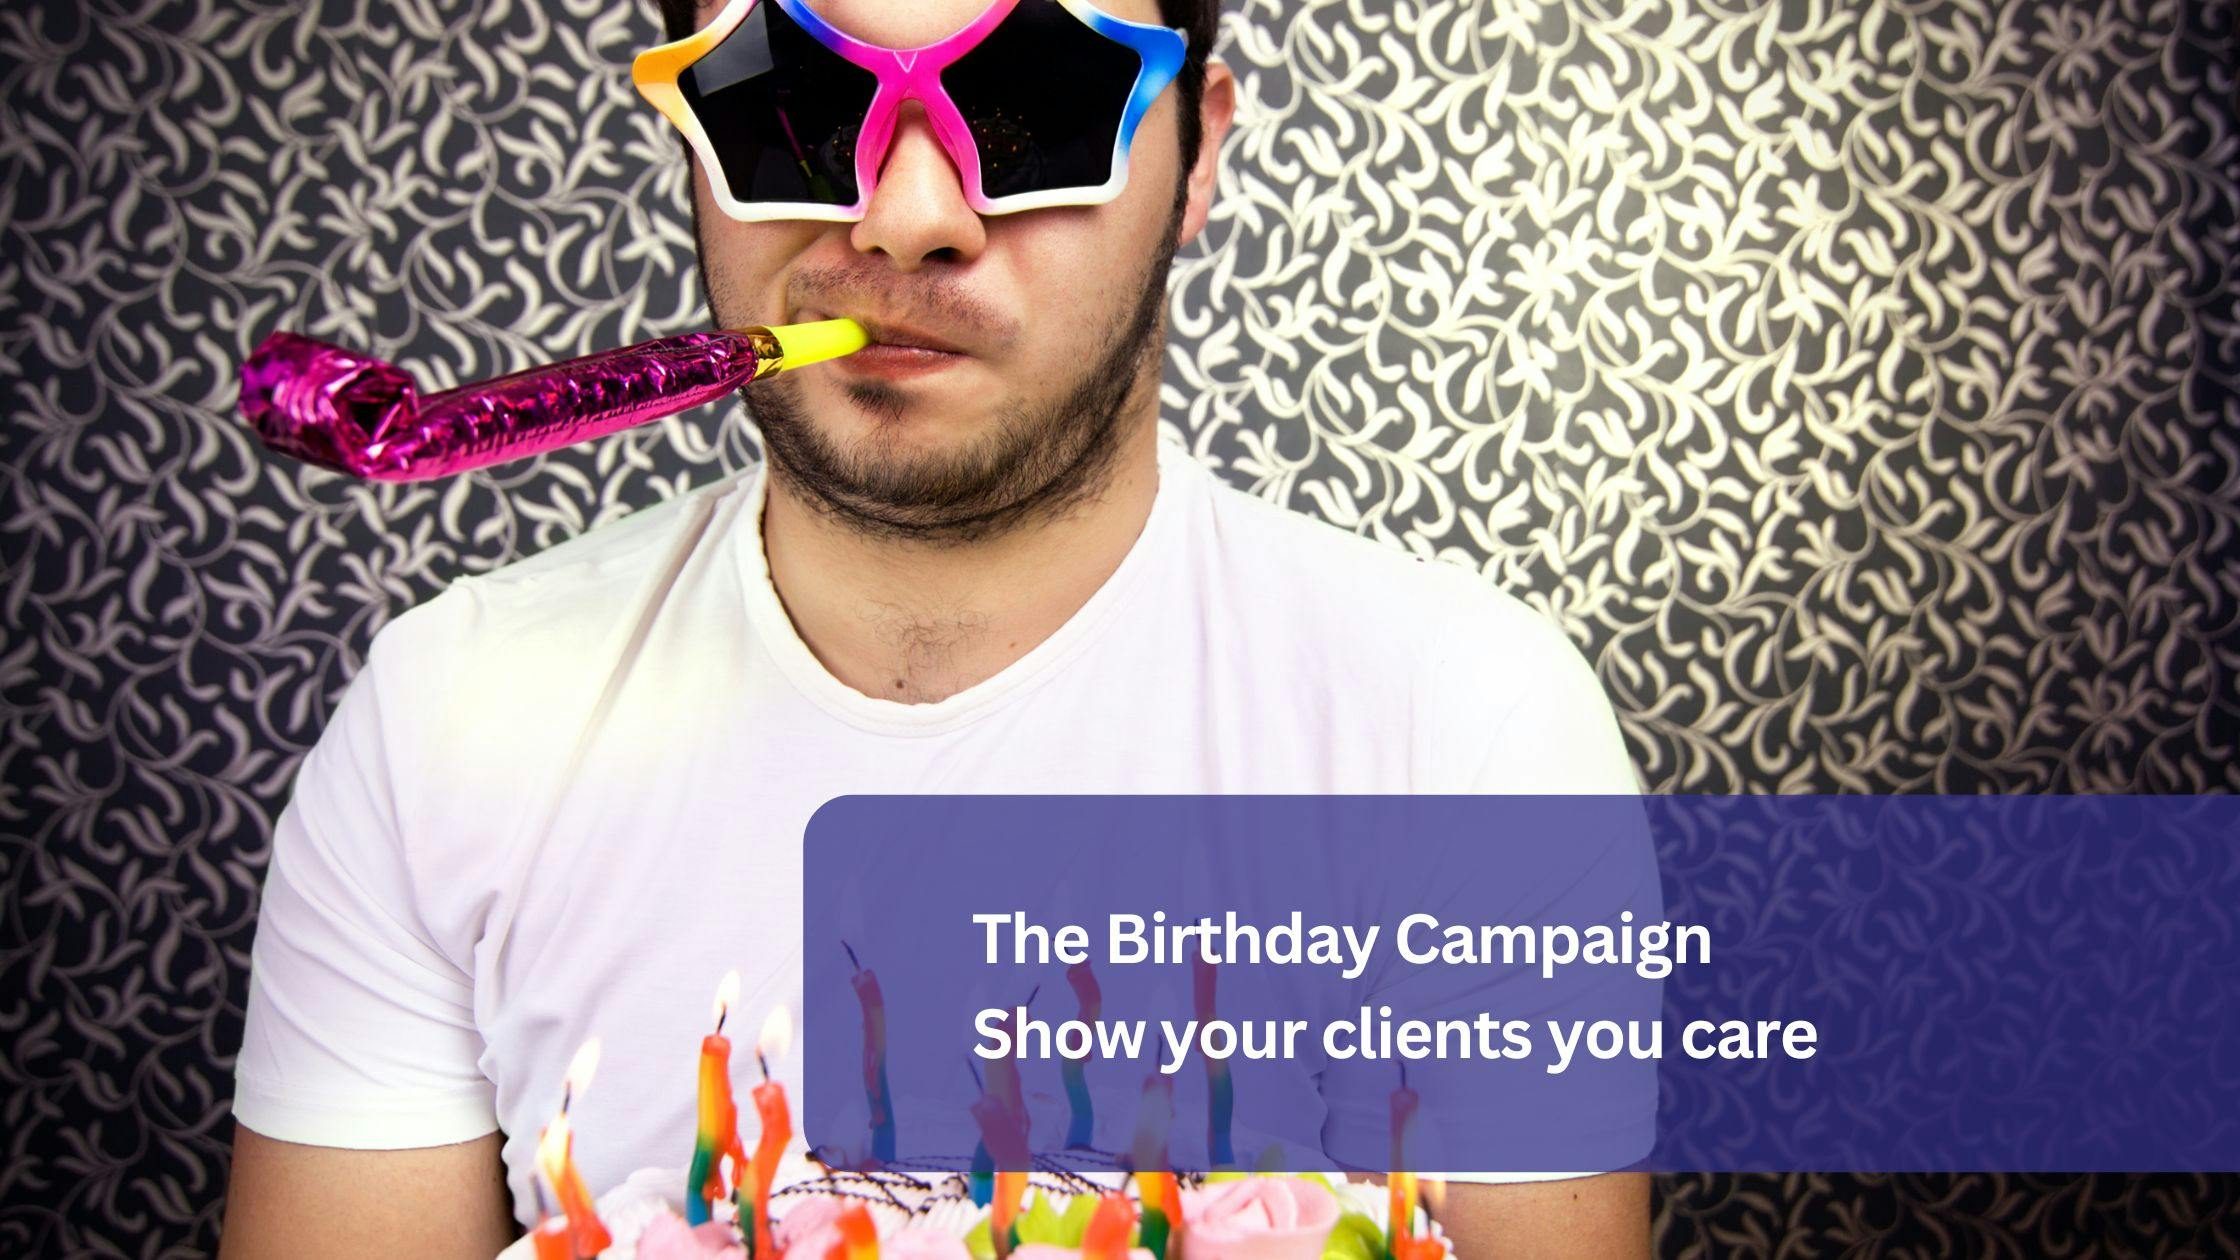 The Birthday Campaign